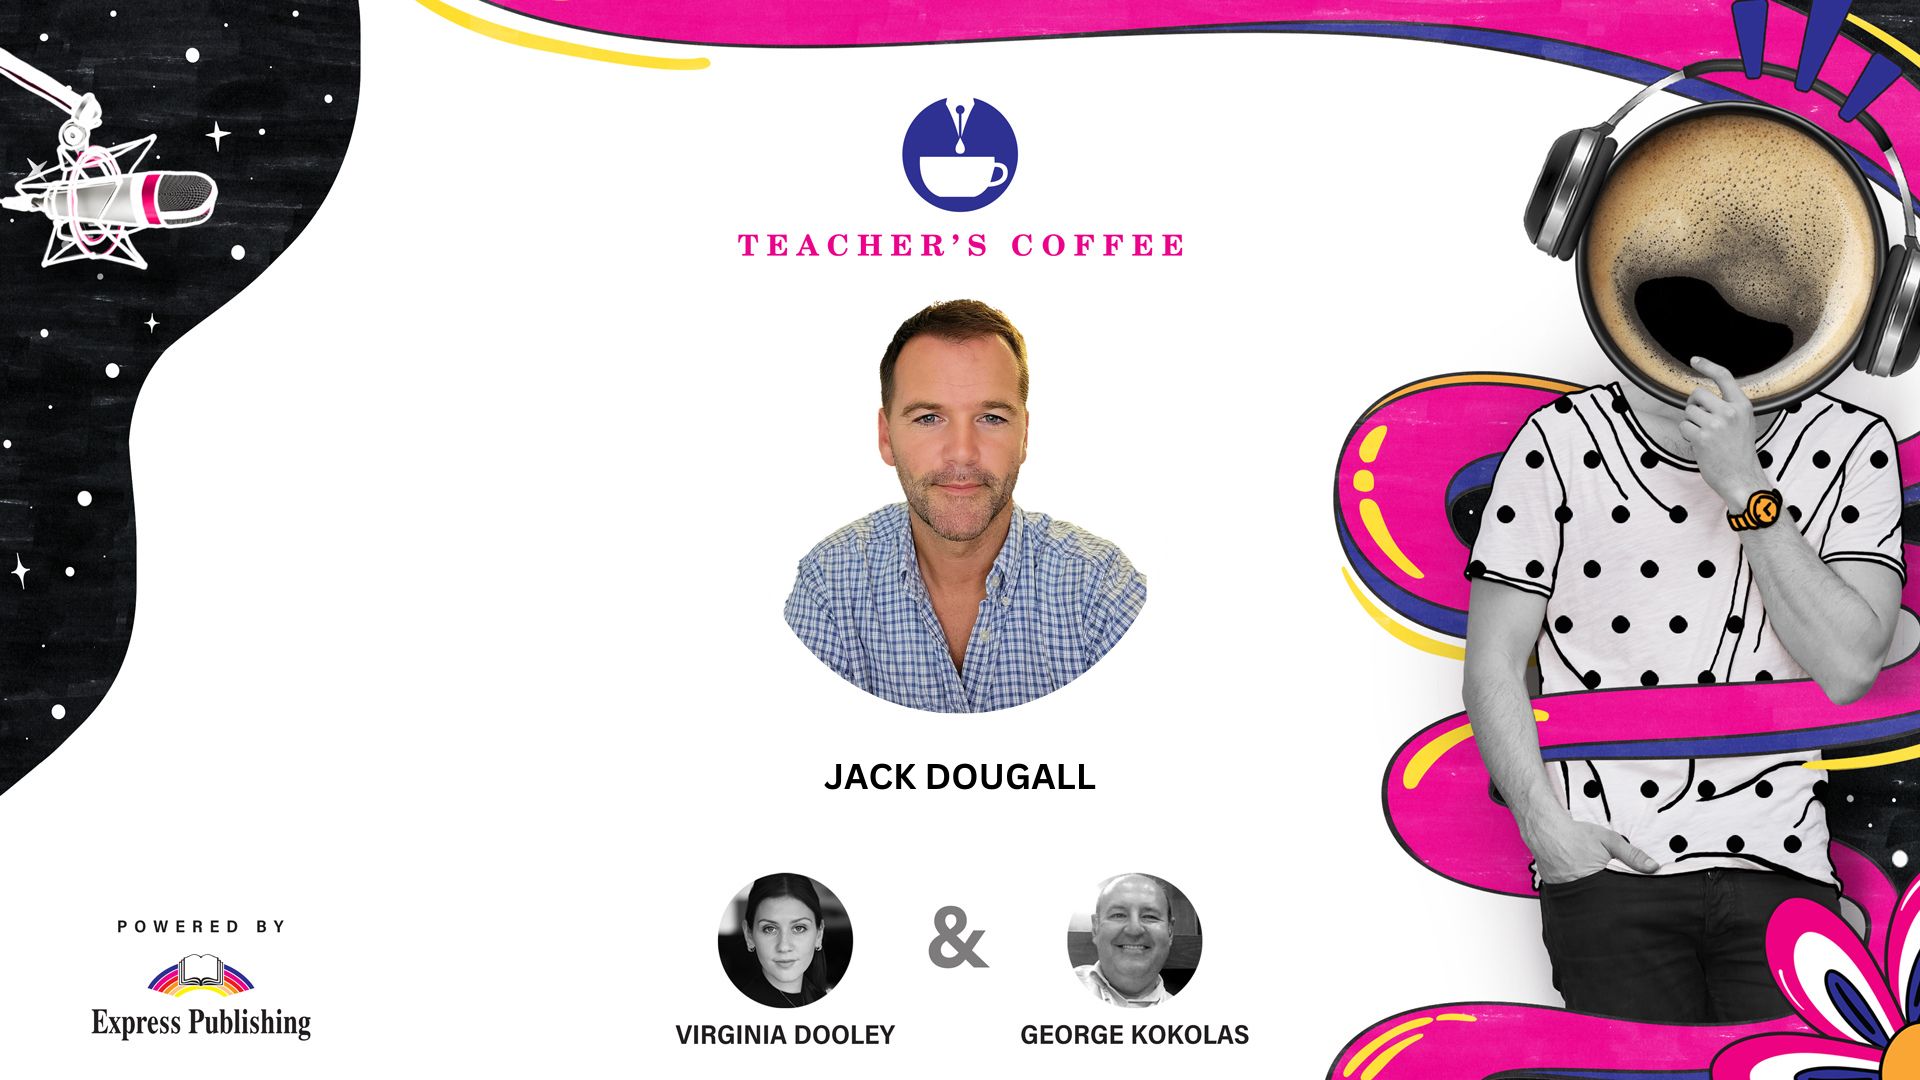 From Surfing to Teaching English | Teacher's Coffee #S07E24 ft. Jack Dougall